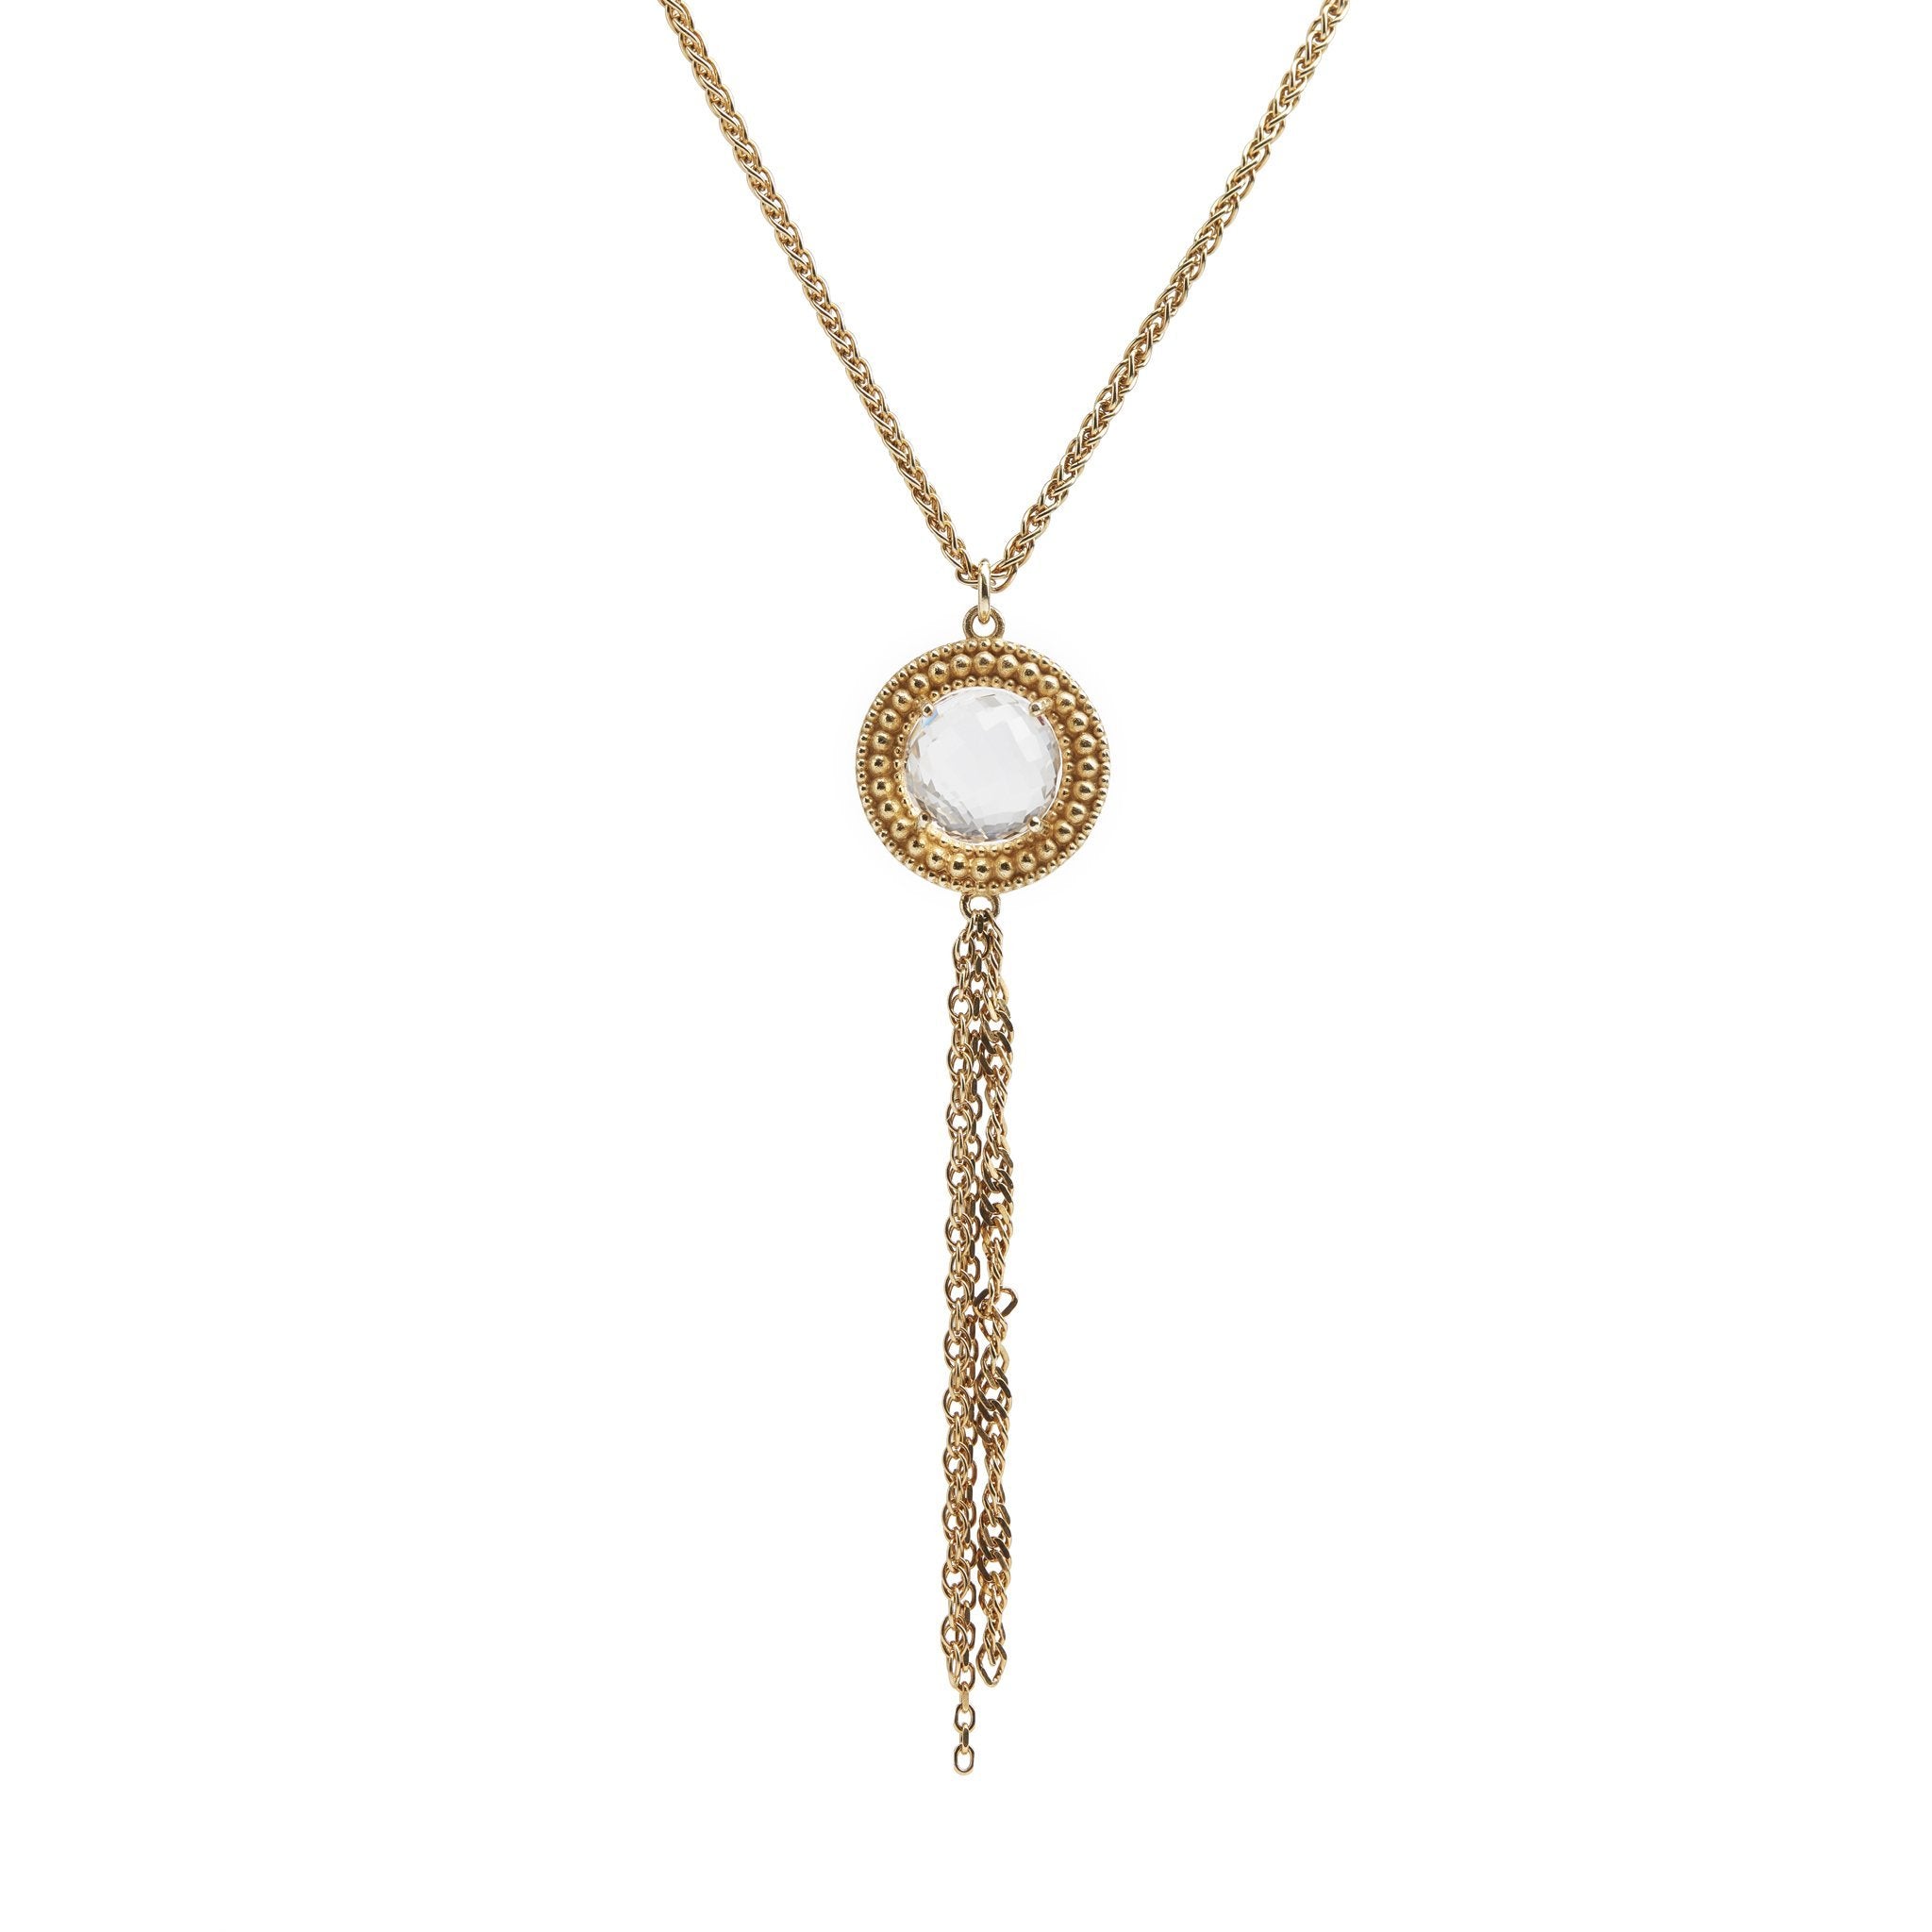 The Renaissance Ethnic Necklace in Crystal Quartz (Gold) - Christelle Chamberland